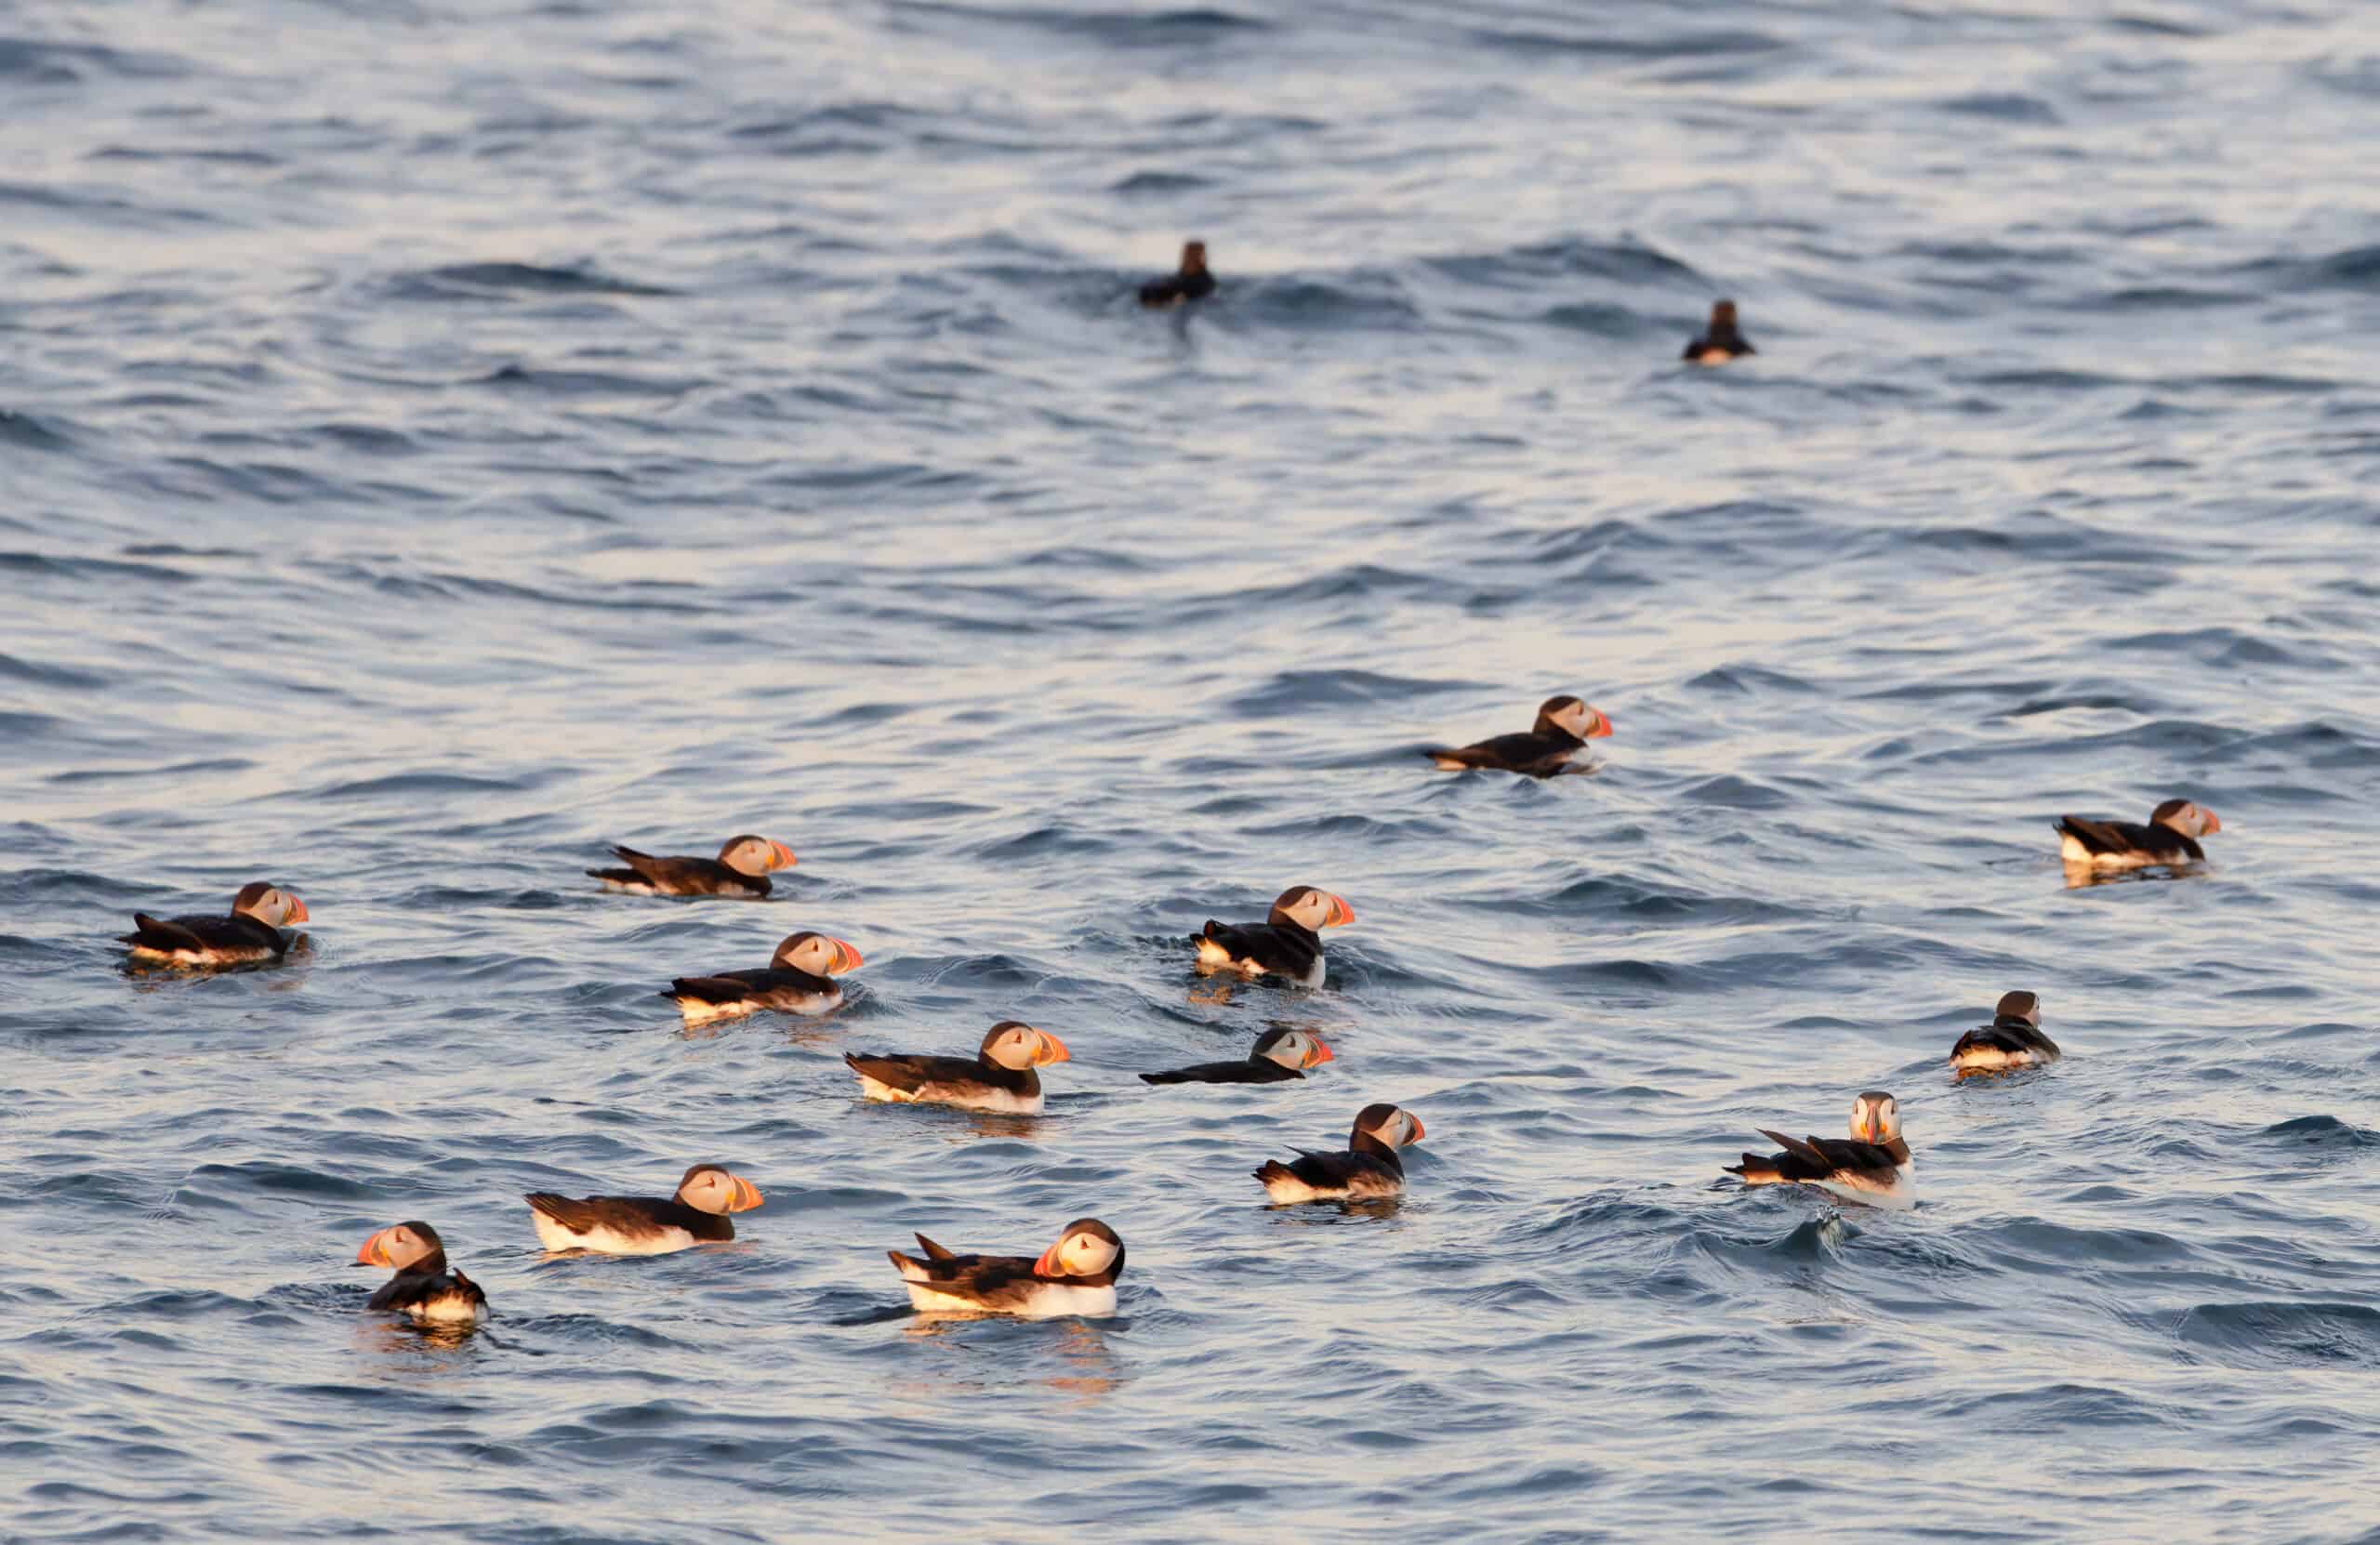 Several puffins swimming in the ocean in Maine